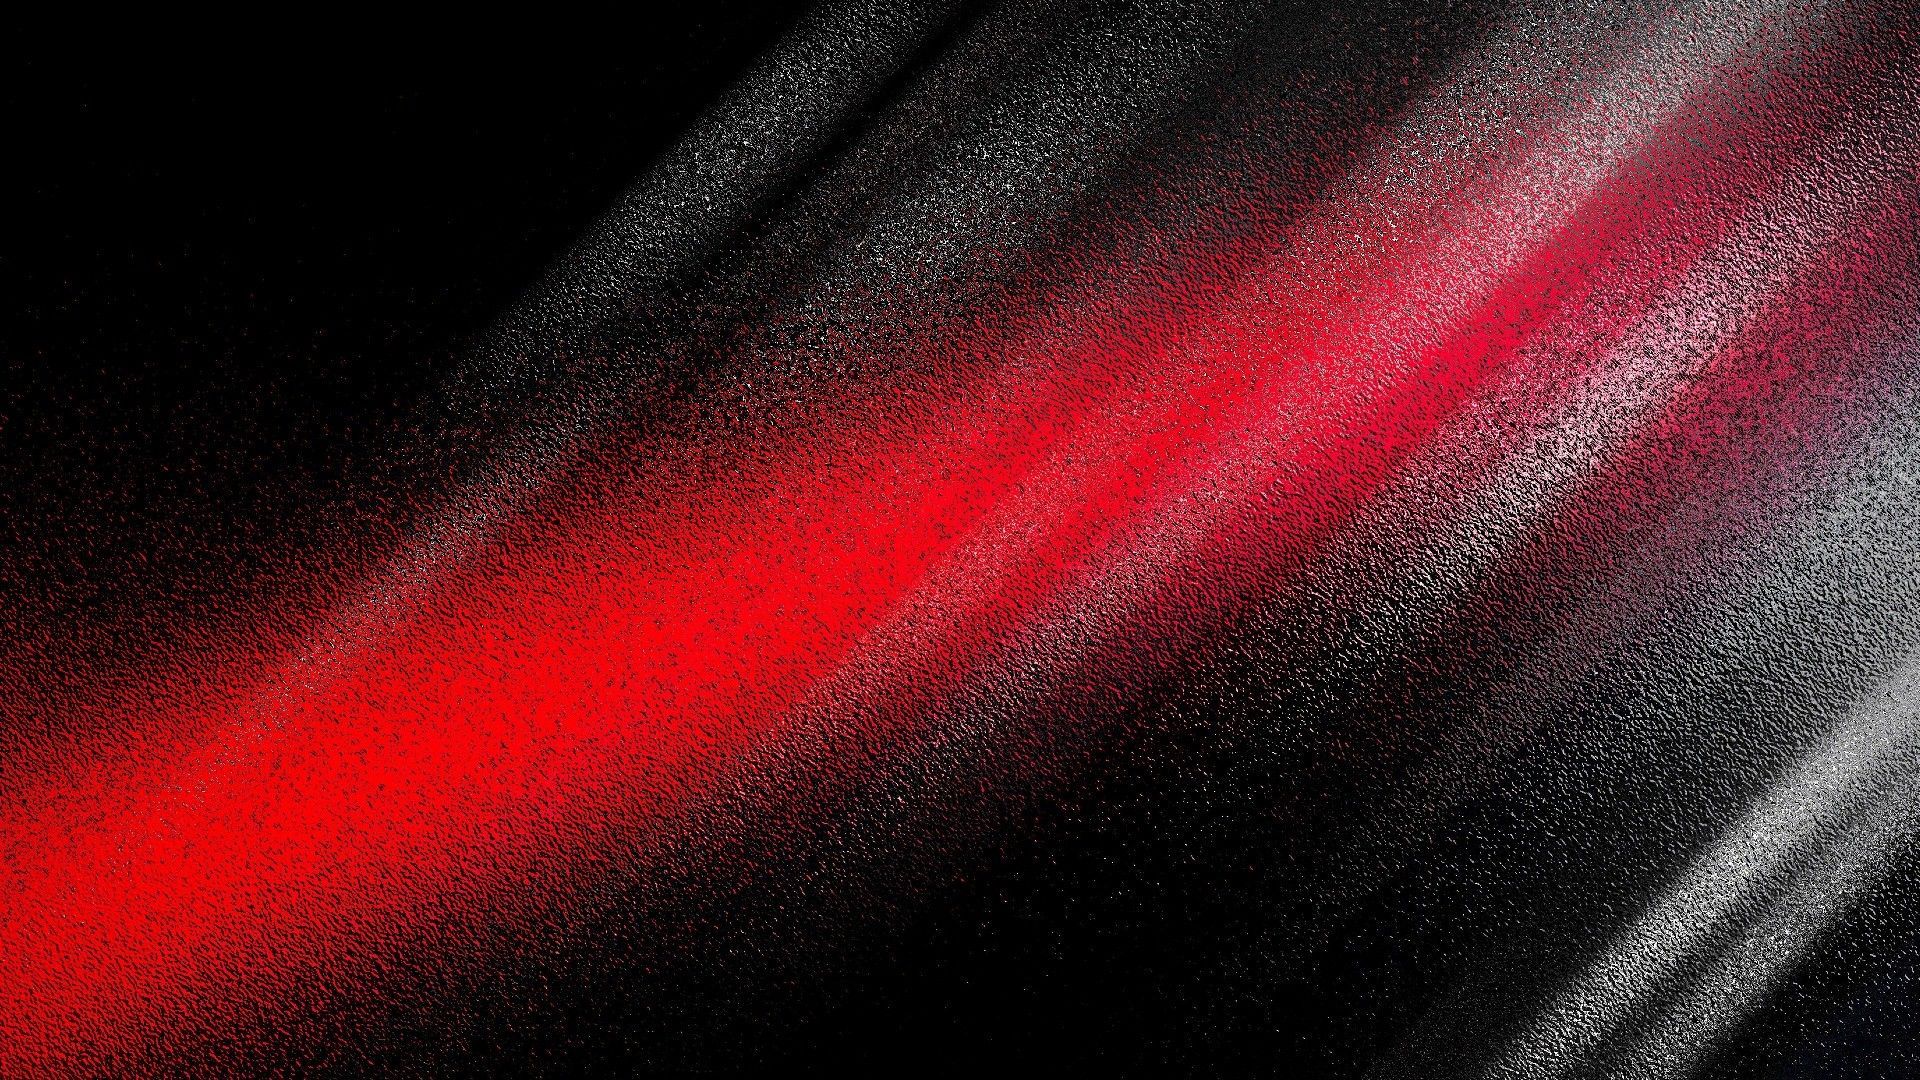 Black and Red Abstract HD Wallpaper Background | HD Wallpapers